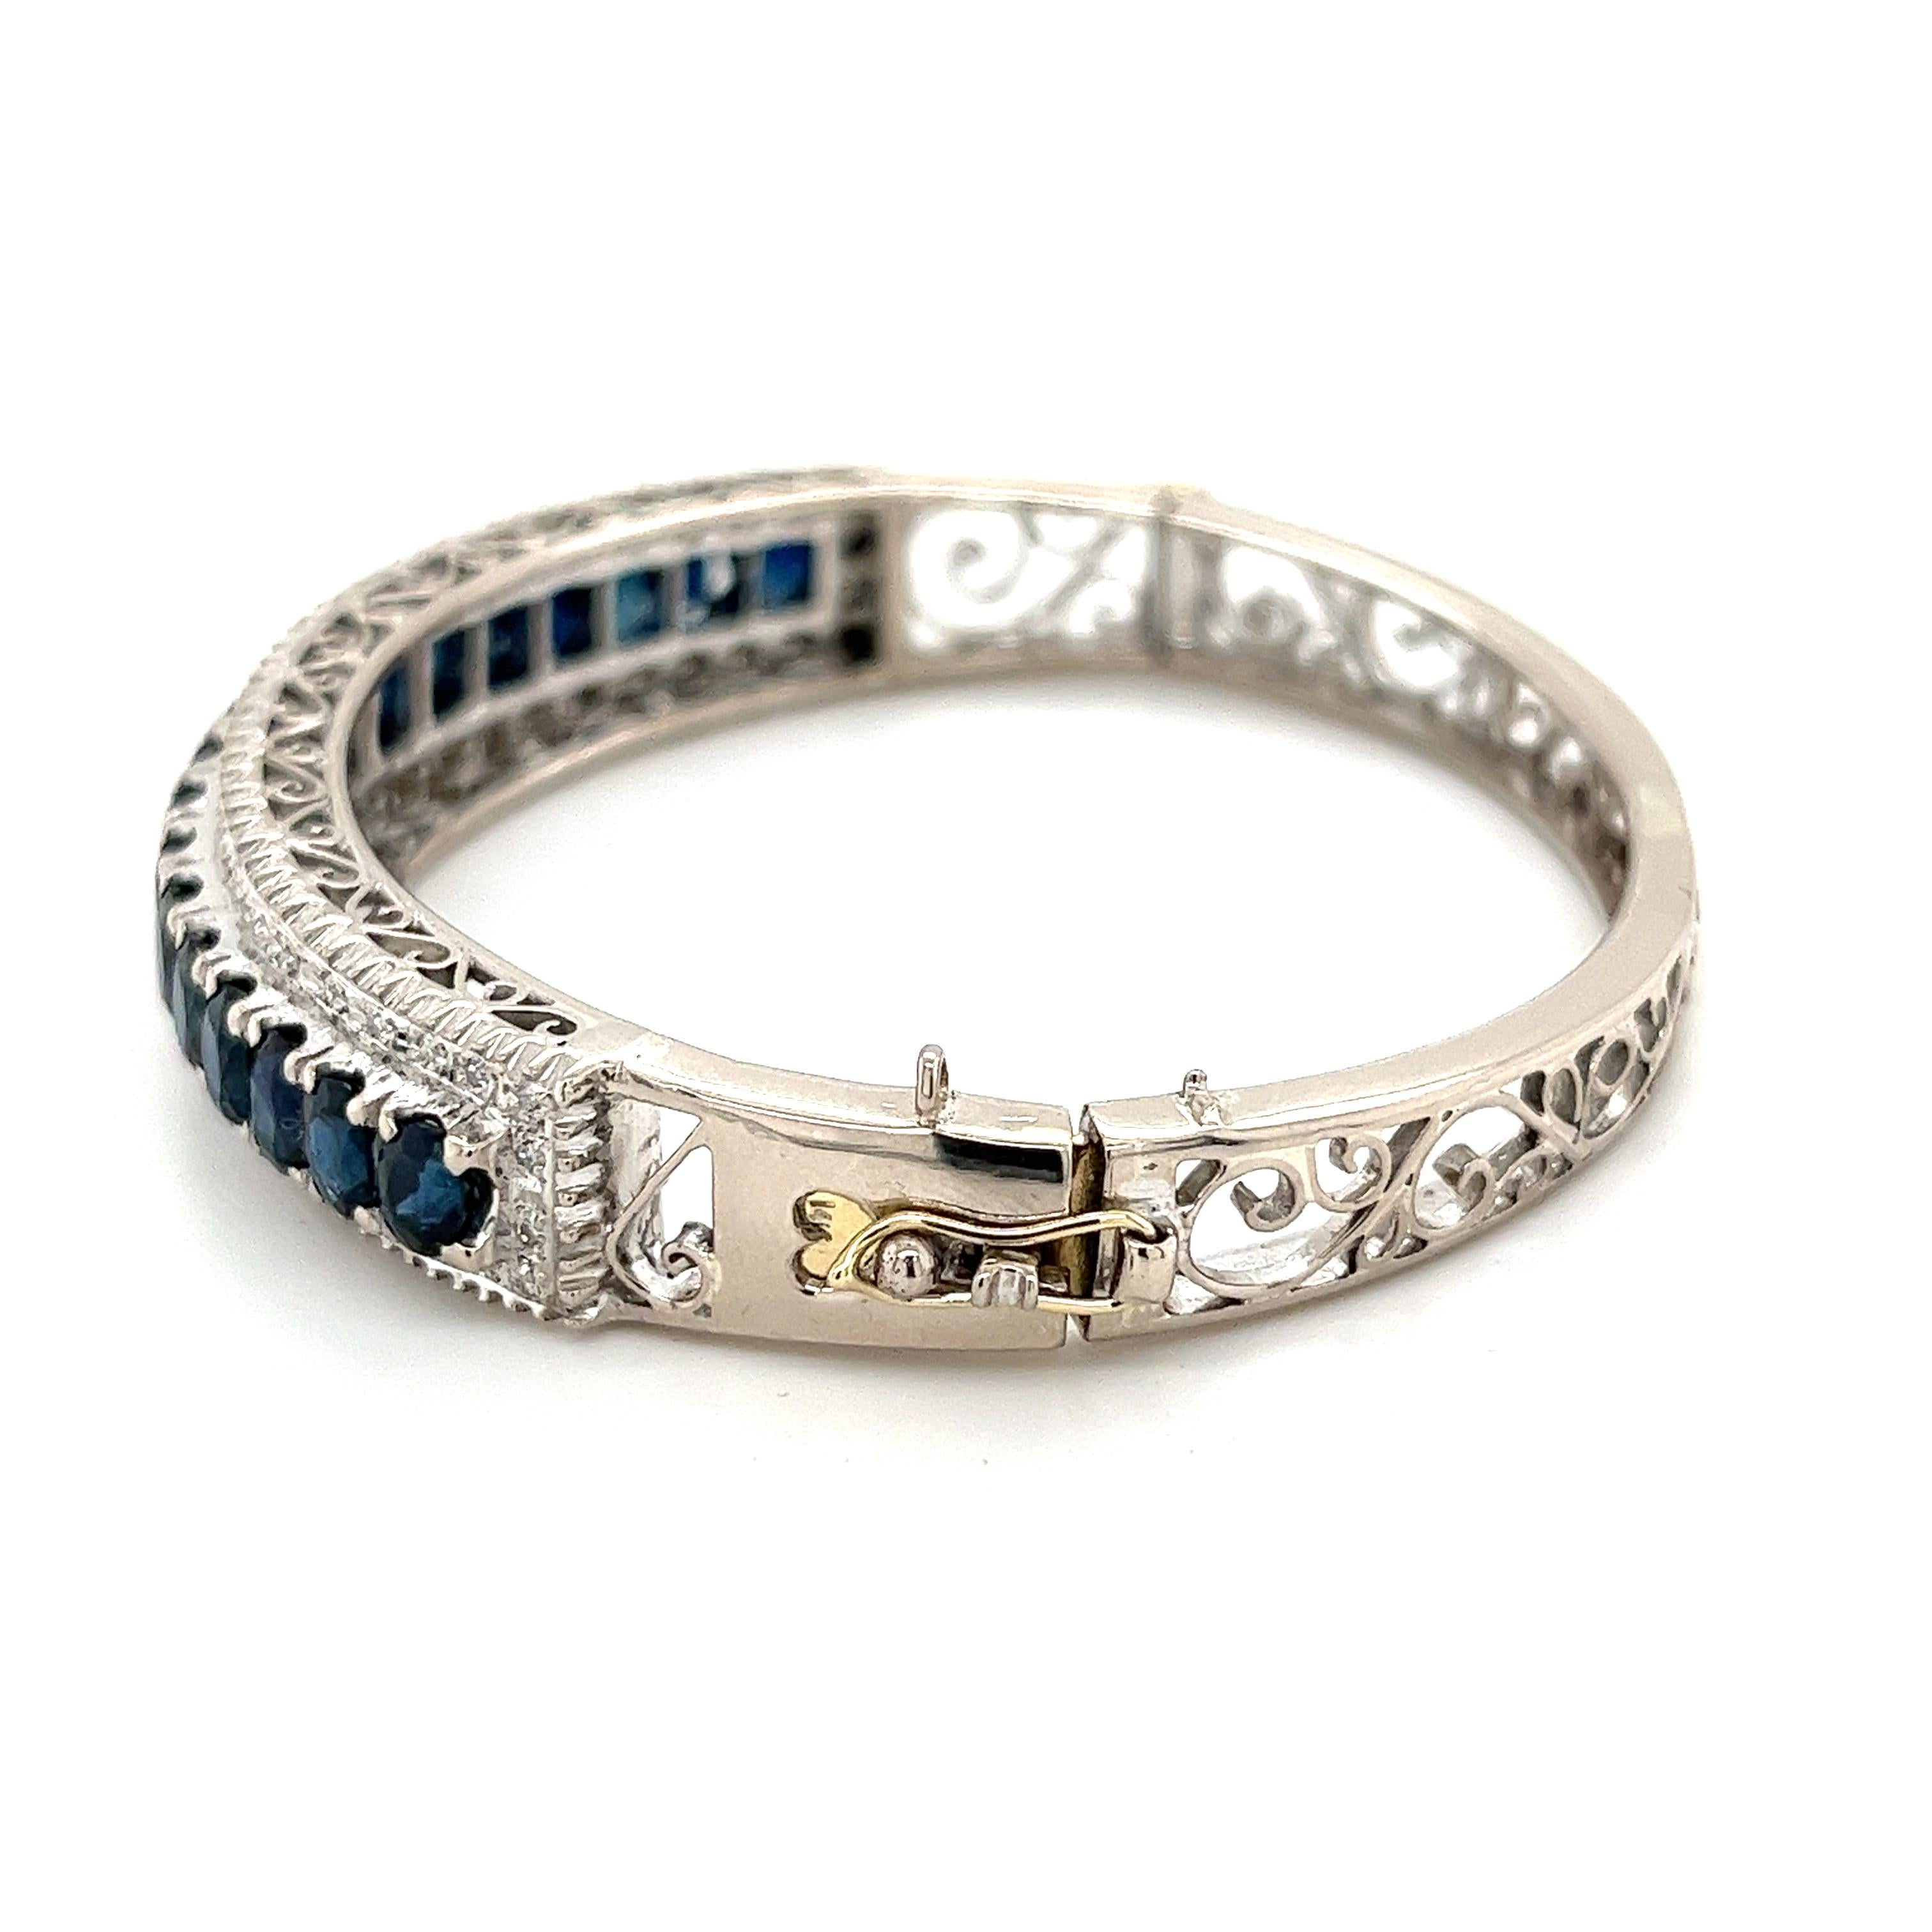 Vintage Art Deco Style Blue Sapphire Cluster Bangle Bracelet in 14k White Gold In Excellent Condition For Sale In Miami, FL